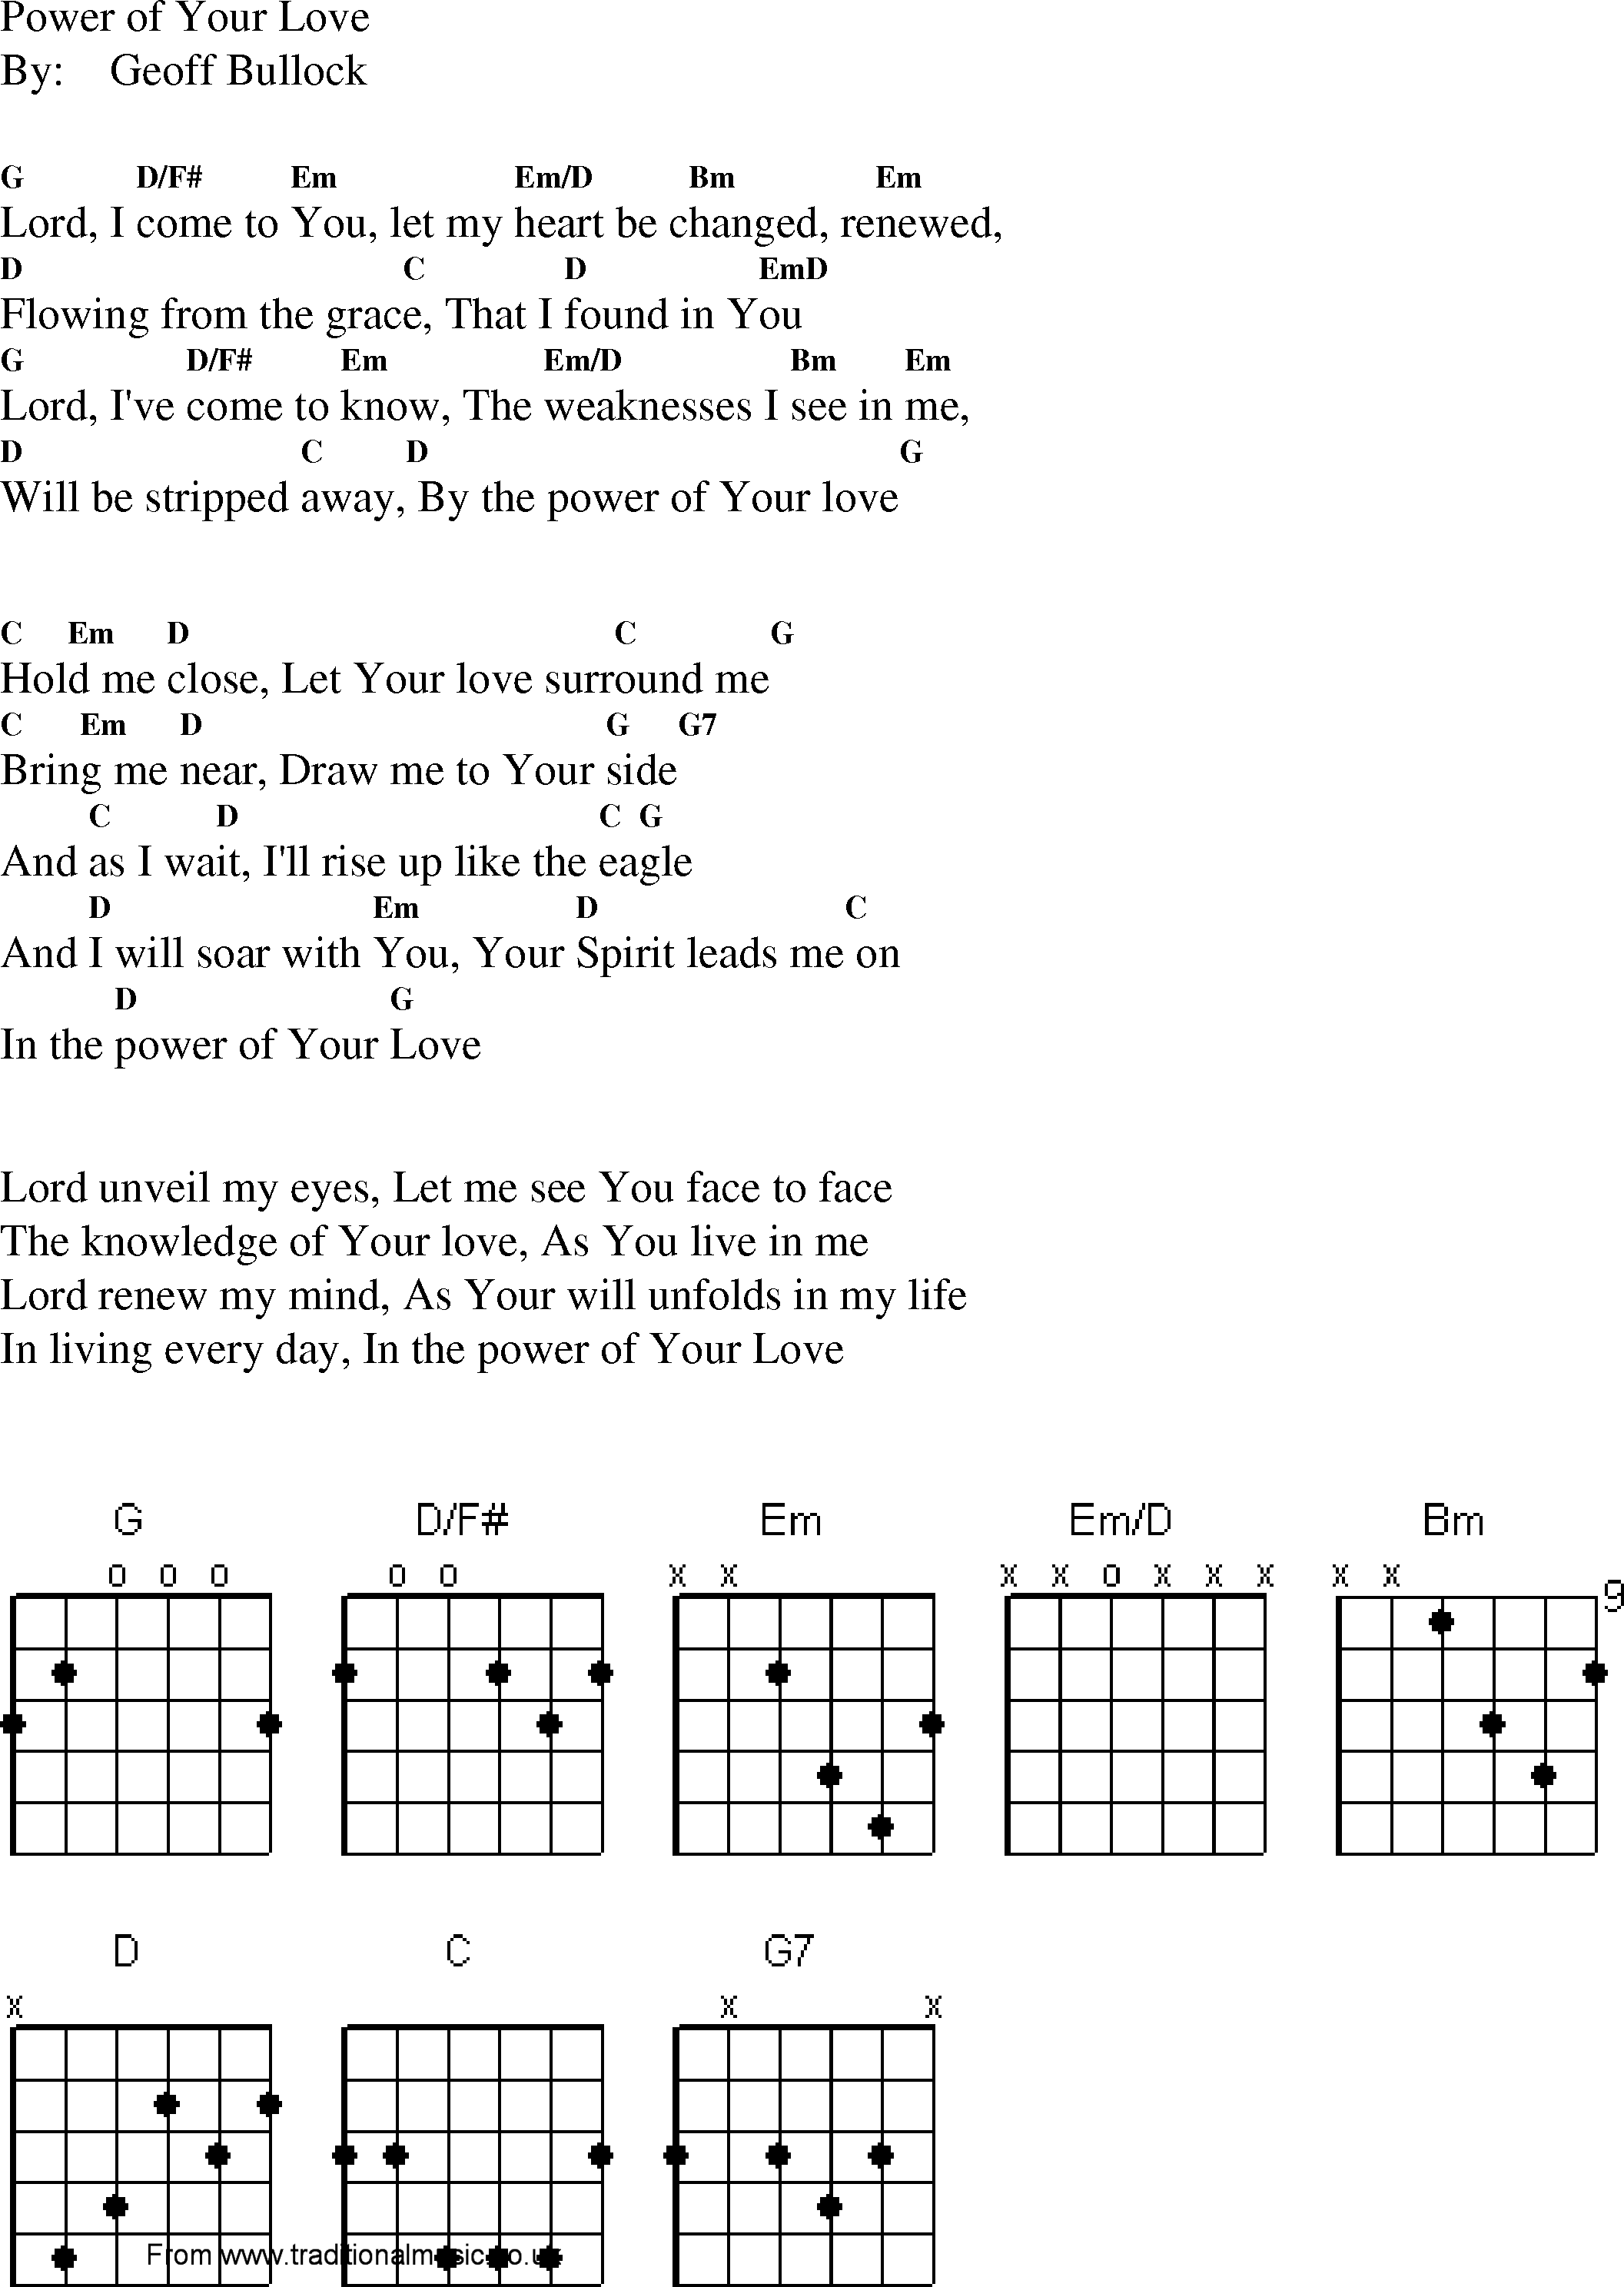 Gospel Song: power_of_your_love, lyrics and chords.